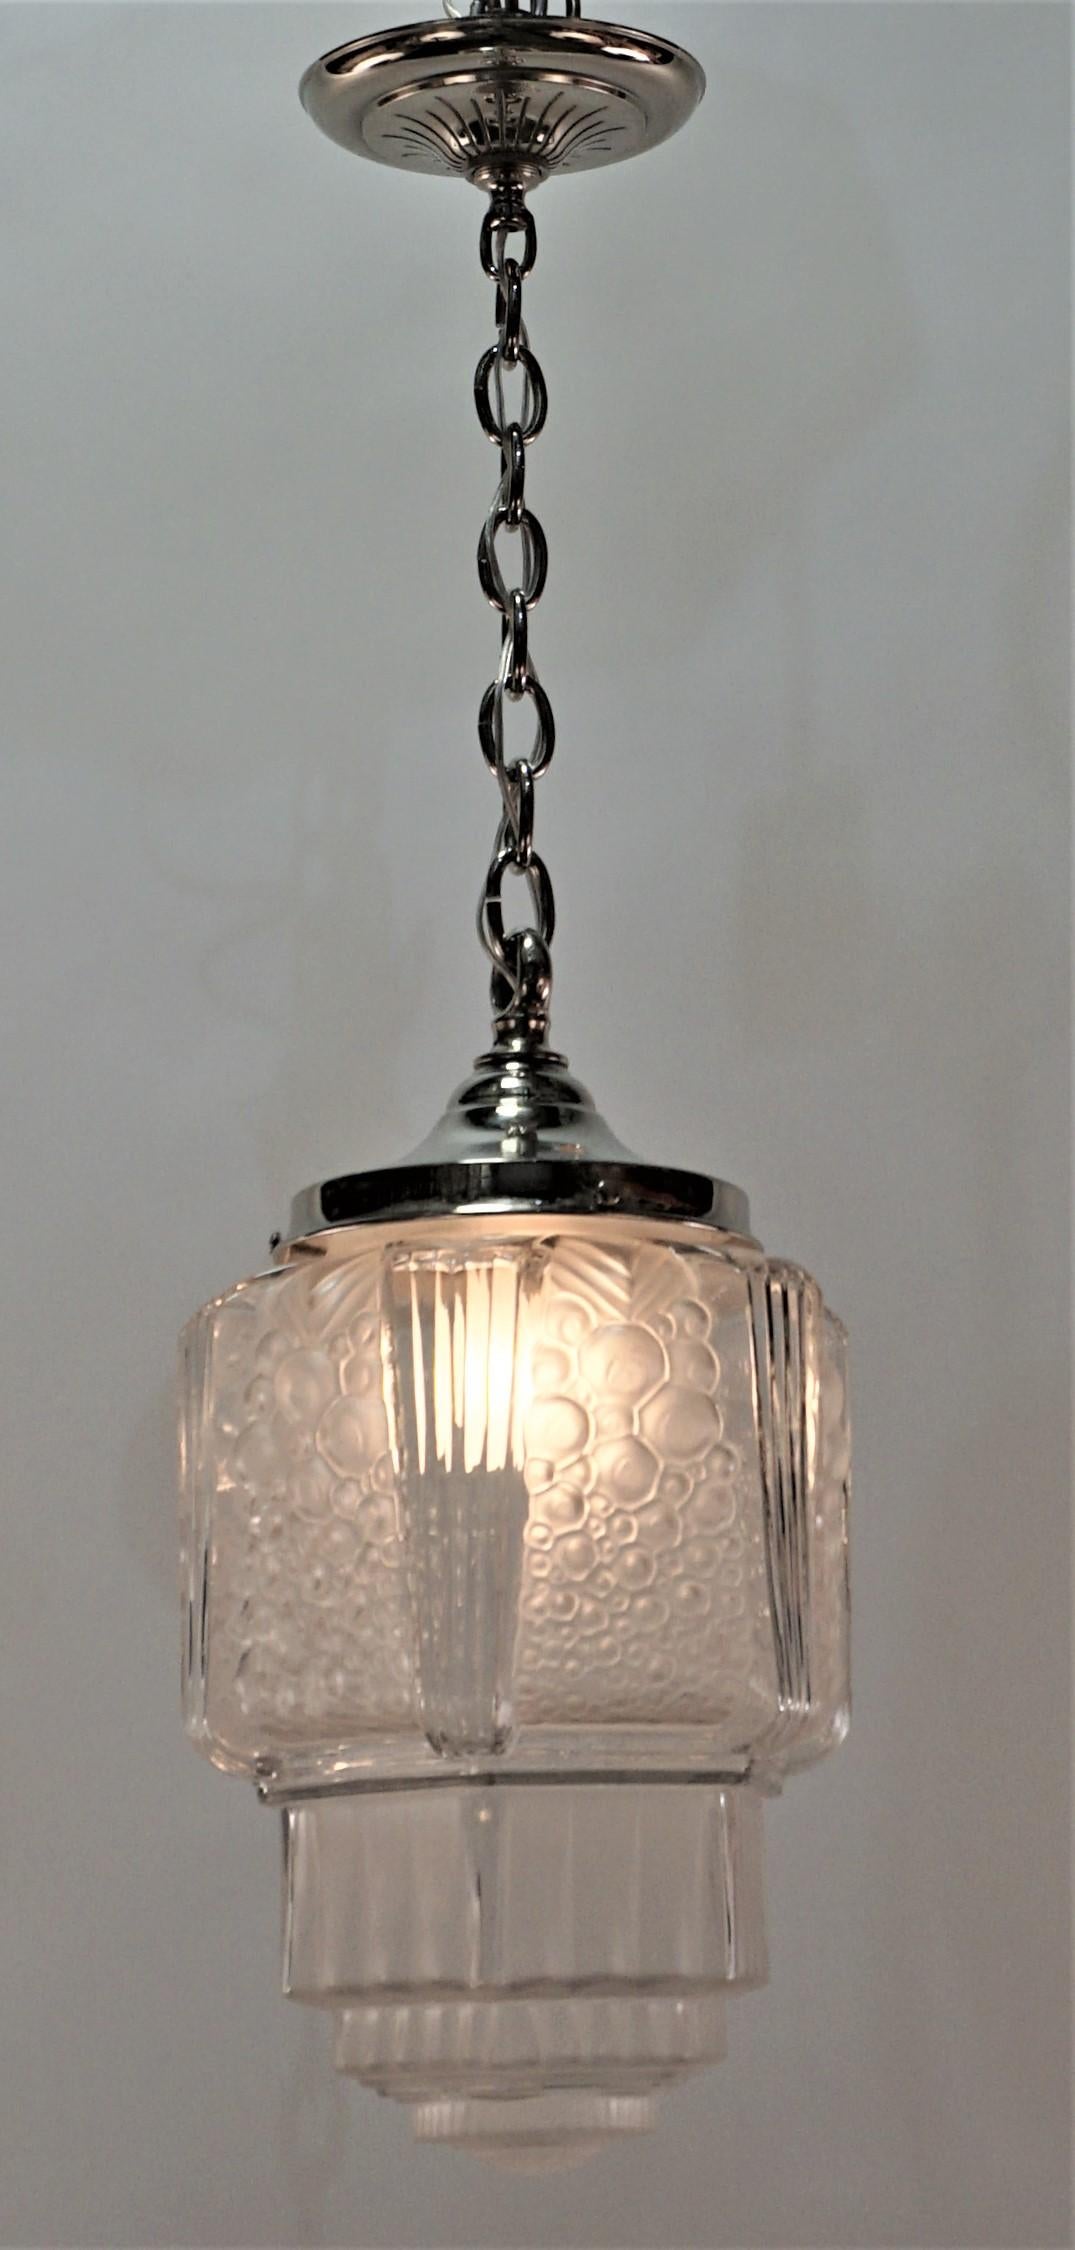 Clear Frost glass glass shade with nickel on bronze fitting Art Deco pendant chandelier.
Minimum height fully installed with 1 link of chain 19